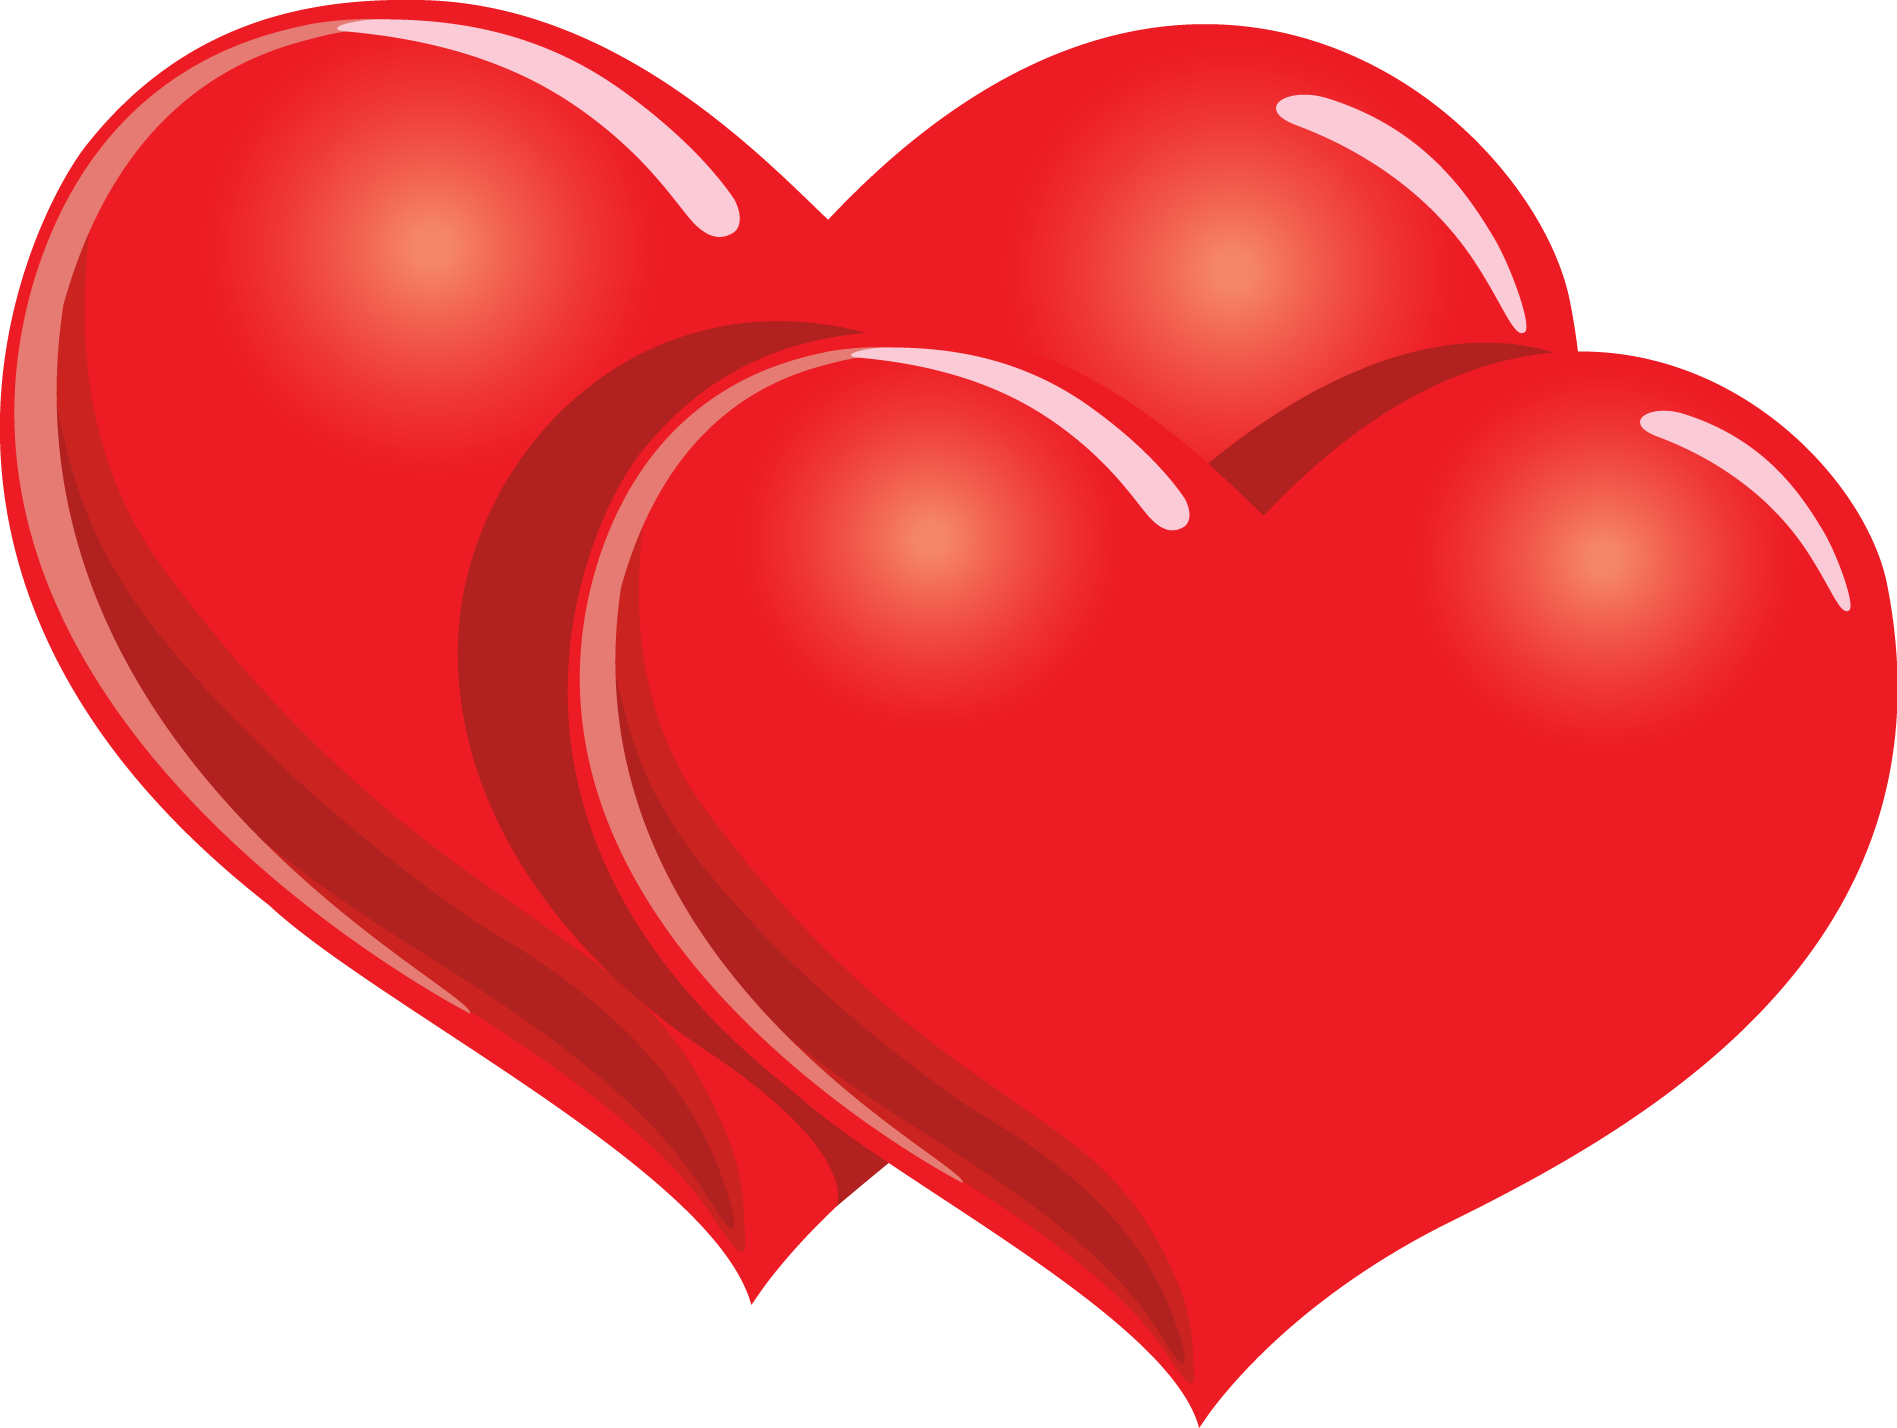 Two Red Hearts Clipart | Clipart Panda - Free Clipart Images